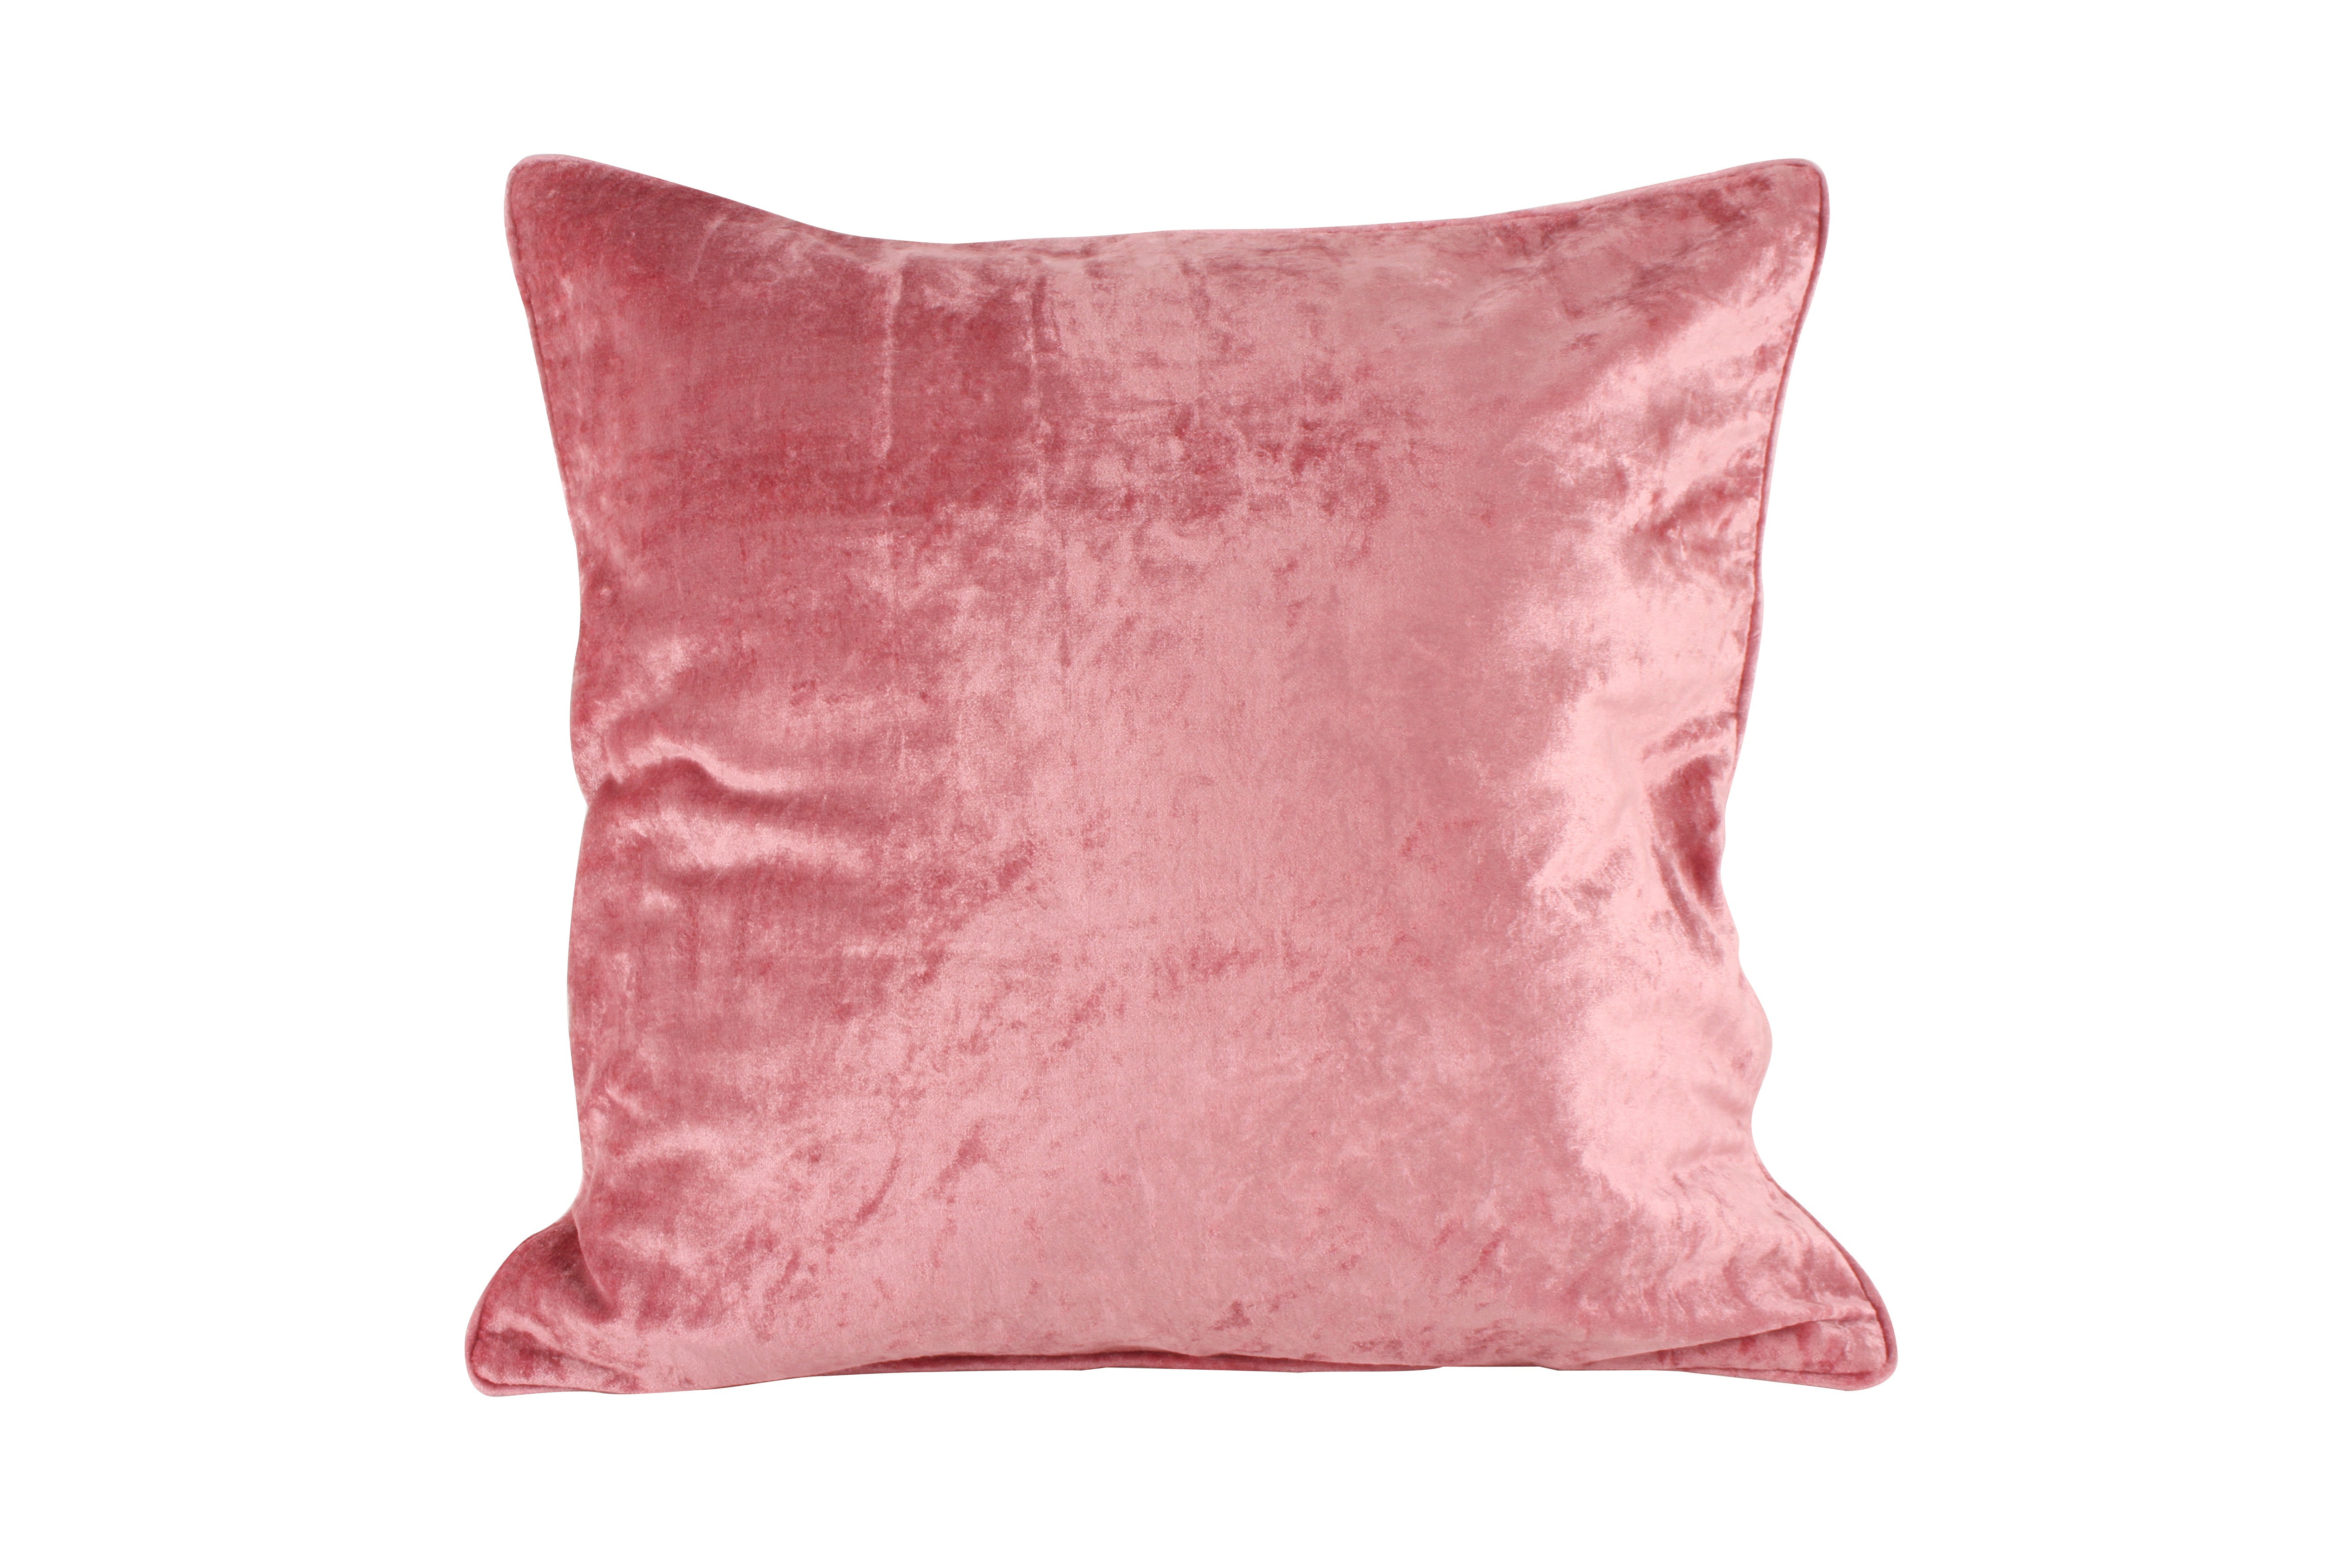 MADOC VELVET FILLED CUSHION WITH PIPPING 50 X 50cm